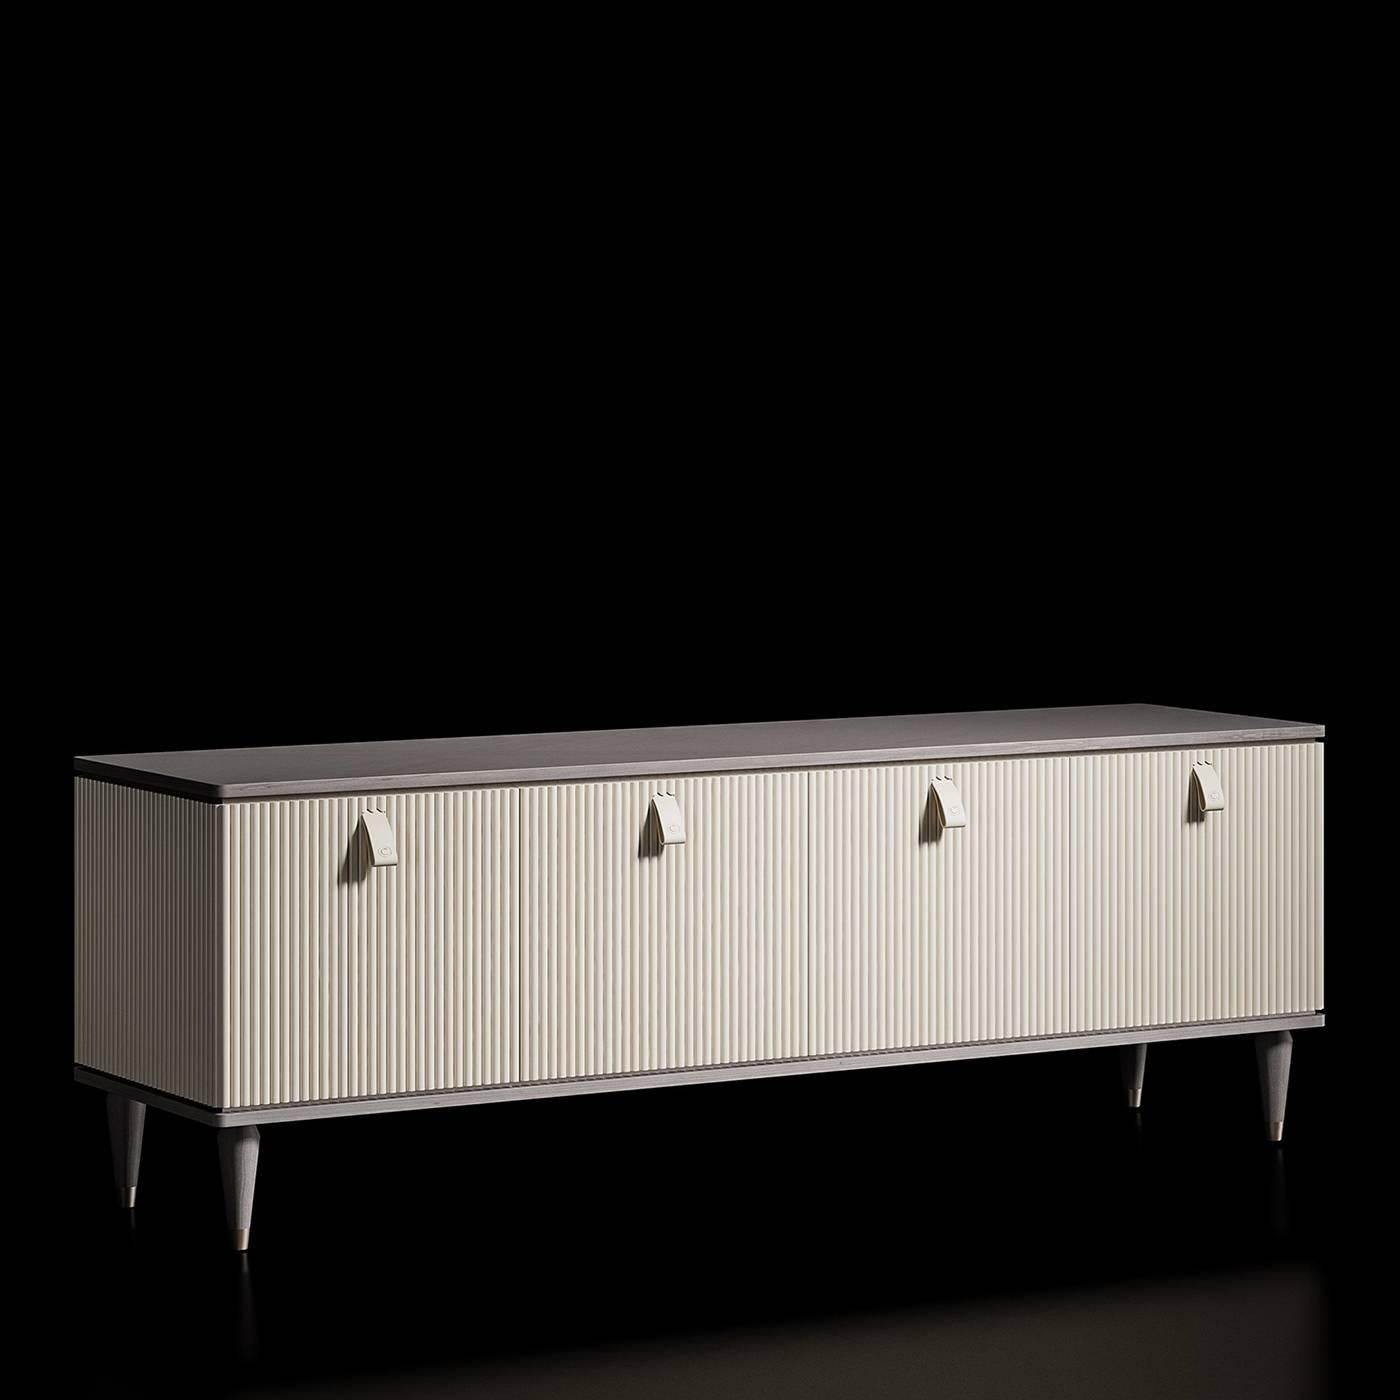 Refined and stately, this elegant sideboard features a rectangular silhouette framed with inlaid veneer in an elegant grey color supported by four conical feet accented with metal ferules in a warm brass finish. The beige-colored central body has